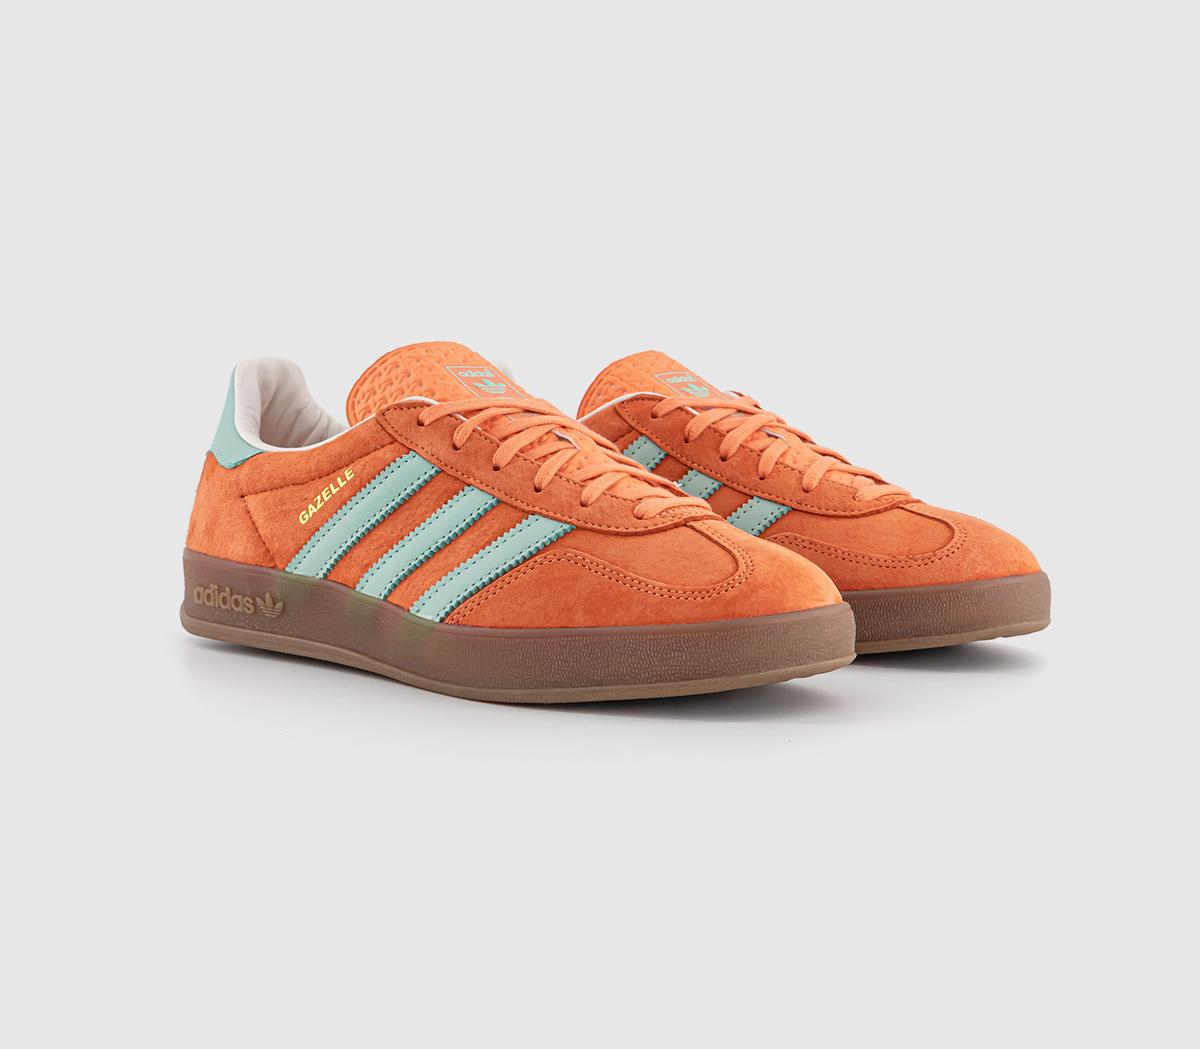 Adidas Gazelle Indoor Trainers Easy Orange Clear Mint Gum Red, 8